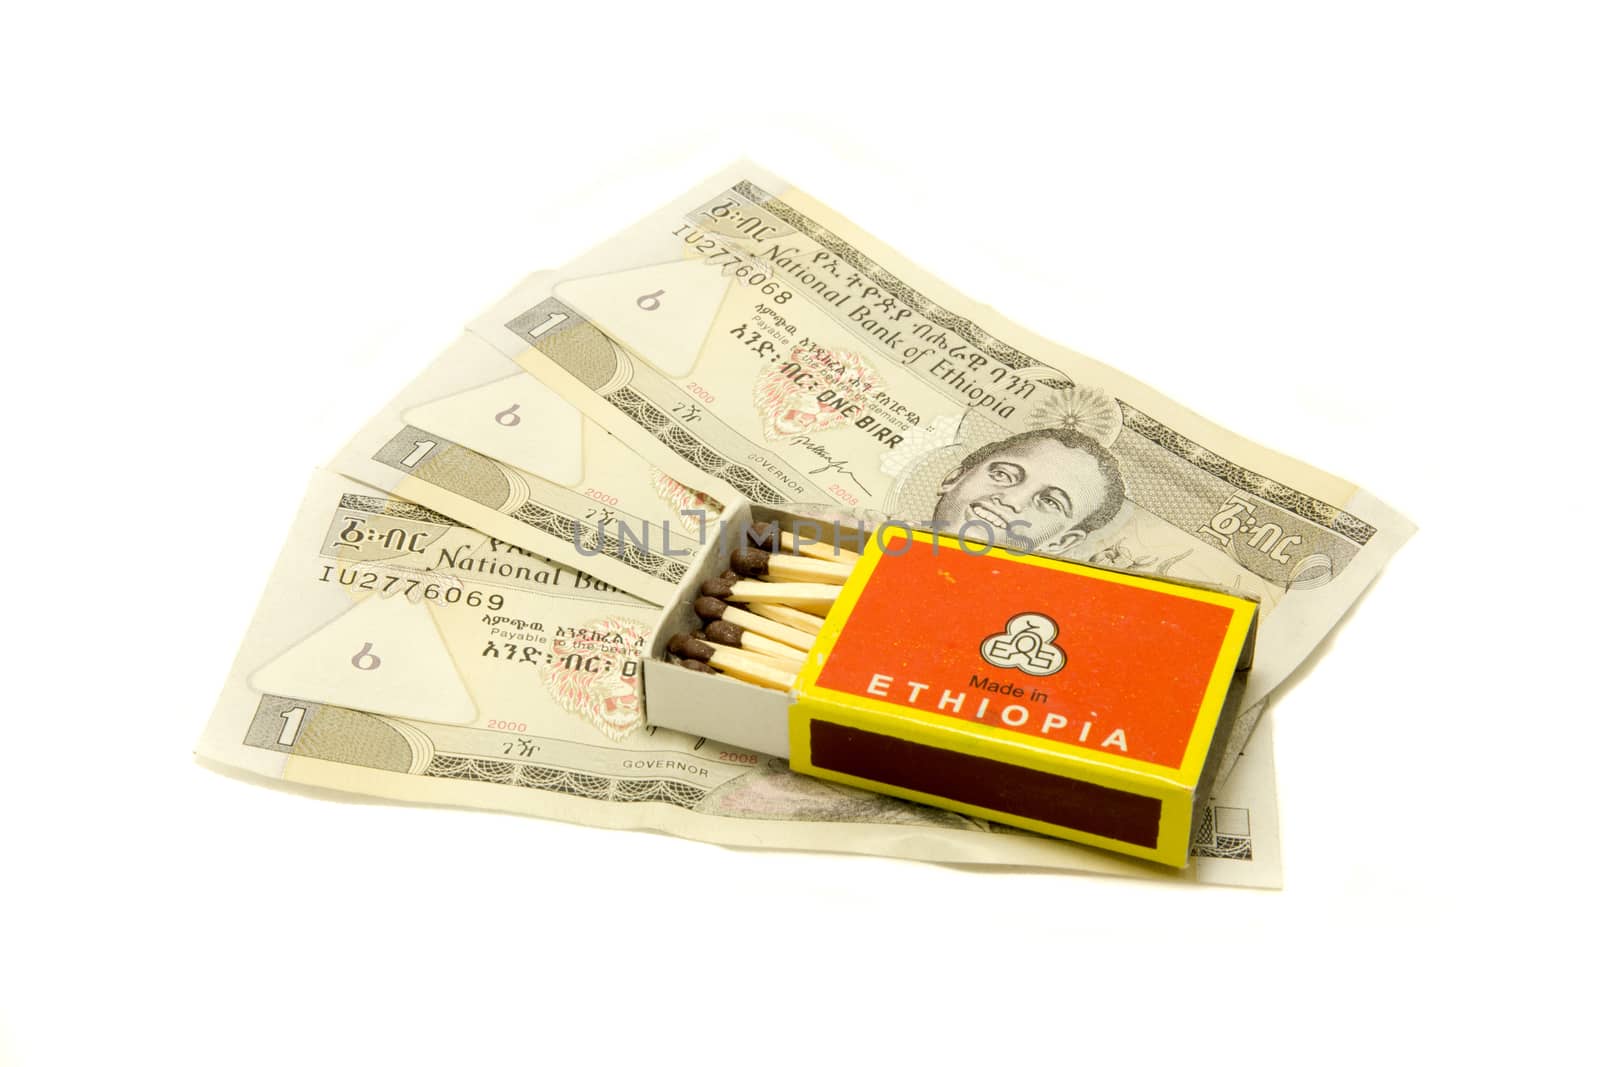 a box of matches on the background of money